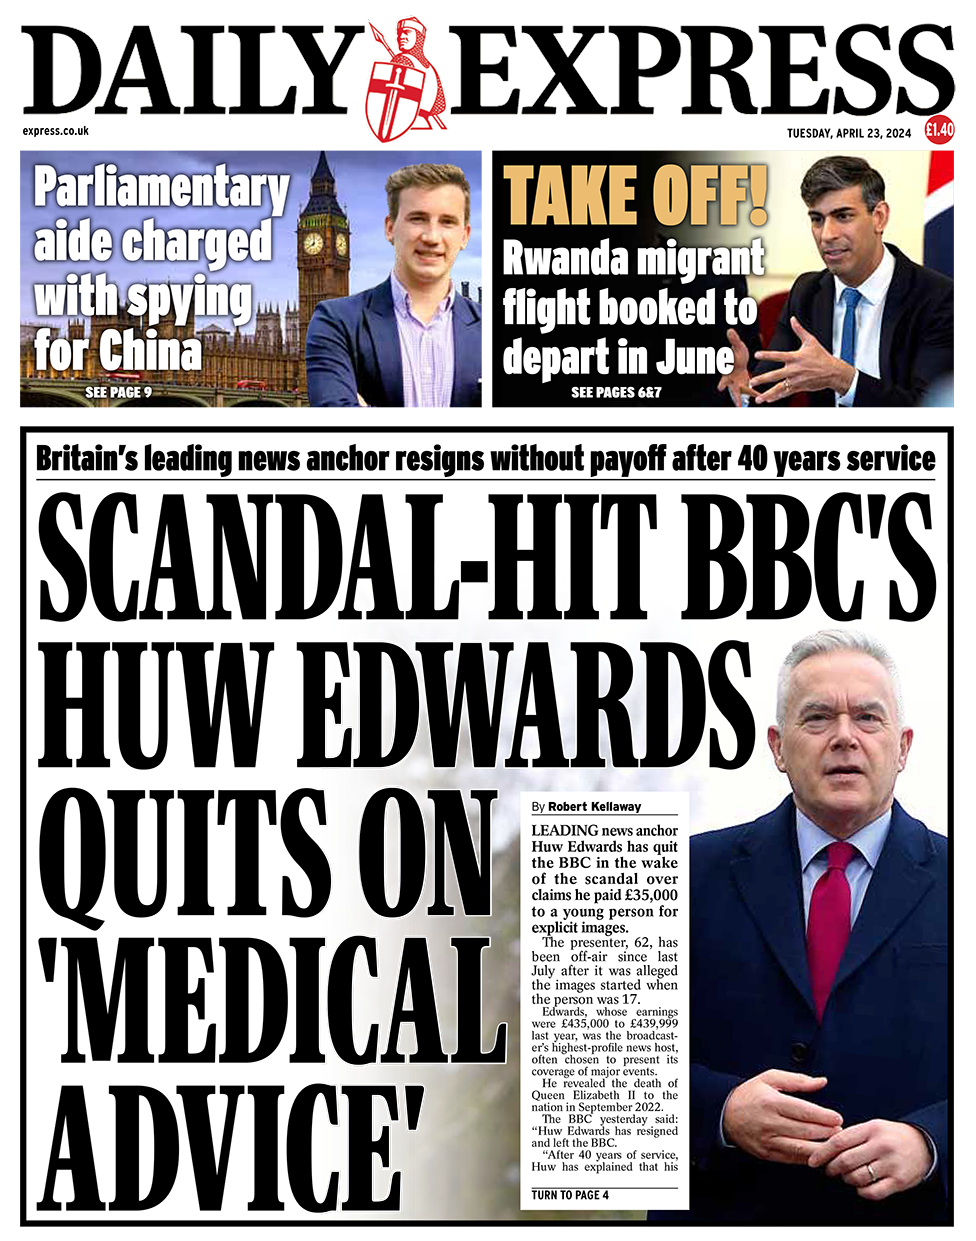 The headline in the Express reads: "Scandal-hit BBC's Huw Edwards quite on 'medical advice'."